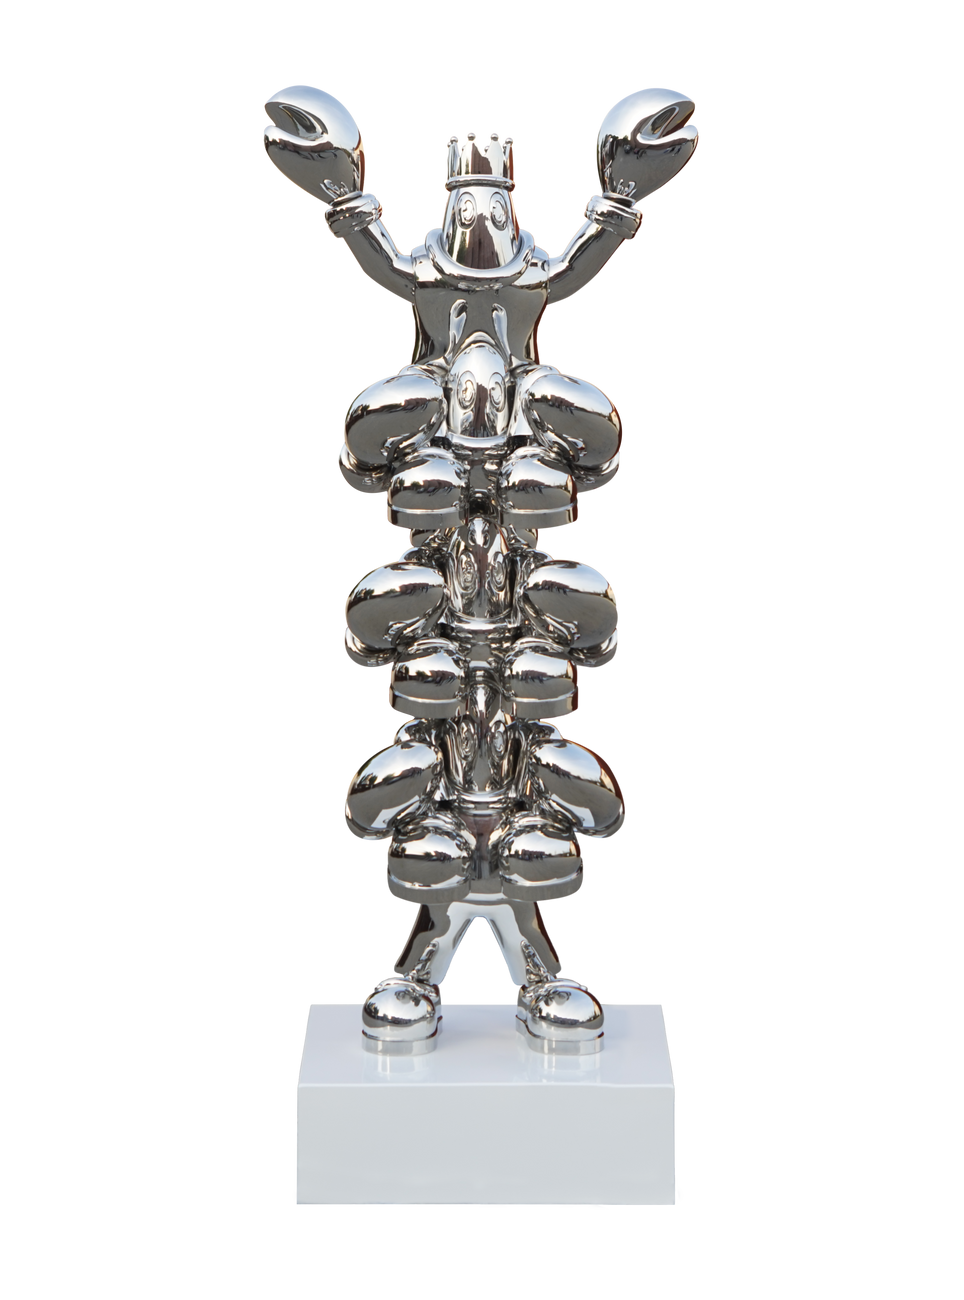 LOBSTER TOTEM (SILVER KING), PHILIP COLBERT, 2022Mirror stainless steel111.0 × 94.0 × 252.0 cmEdition of 3 Plus 2Artist's Proofs (#1/3)